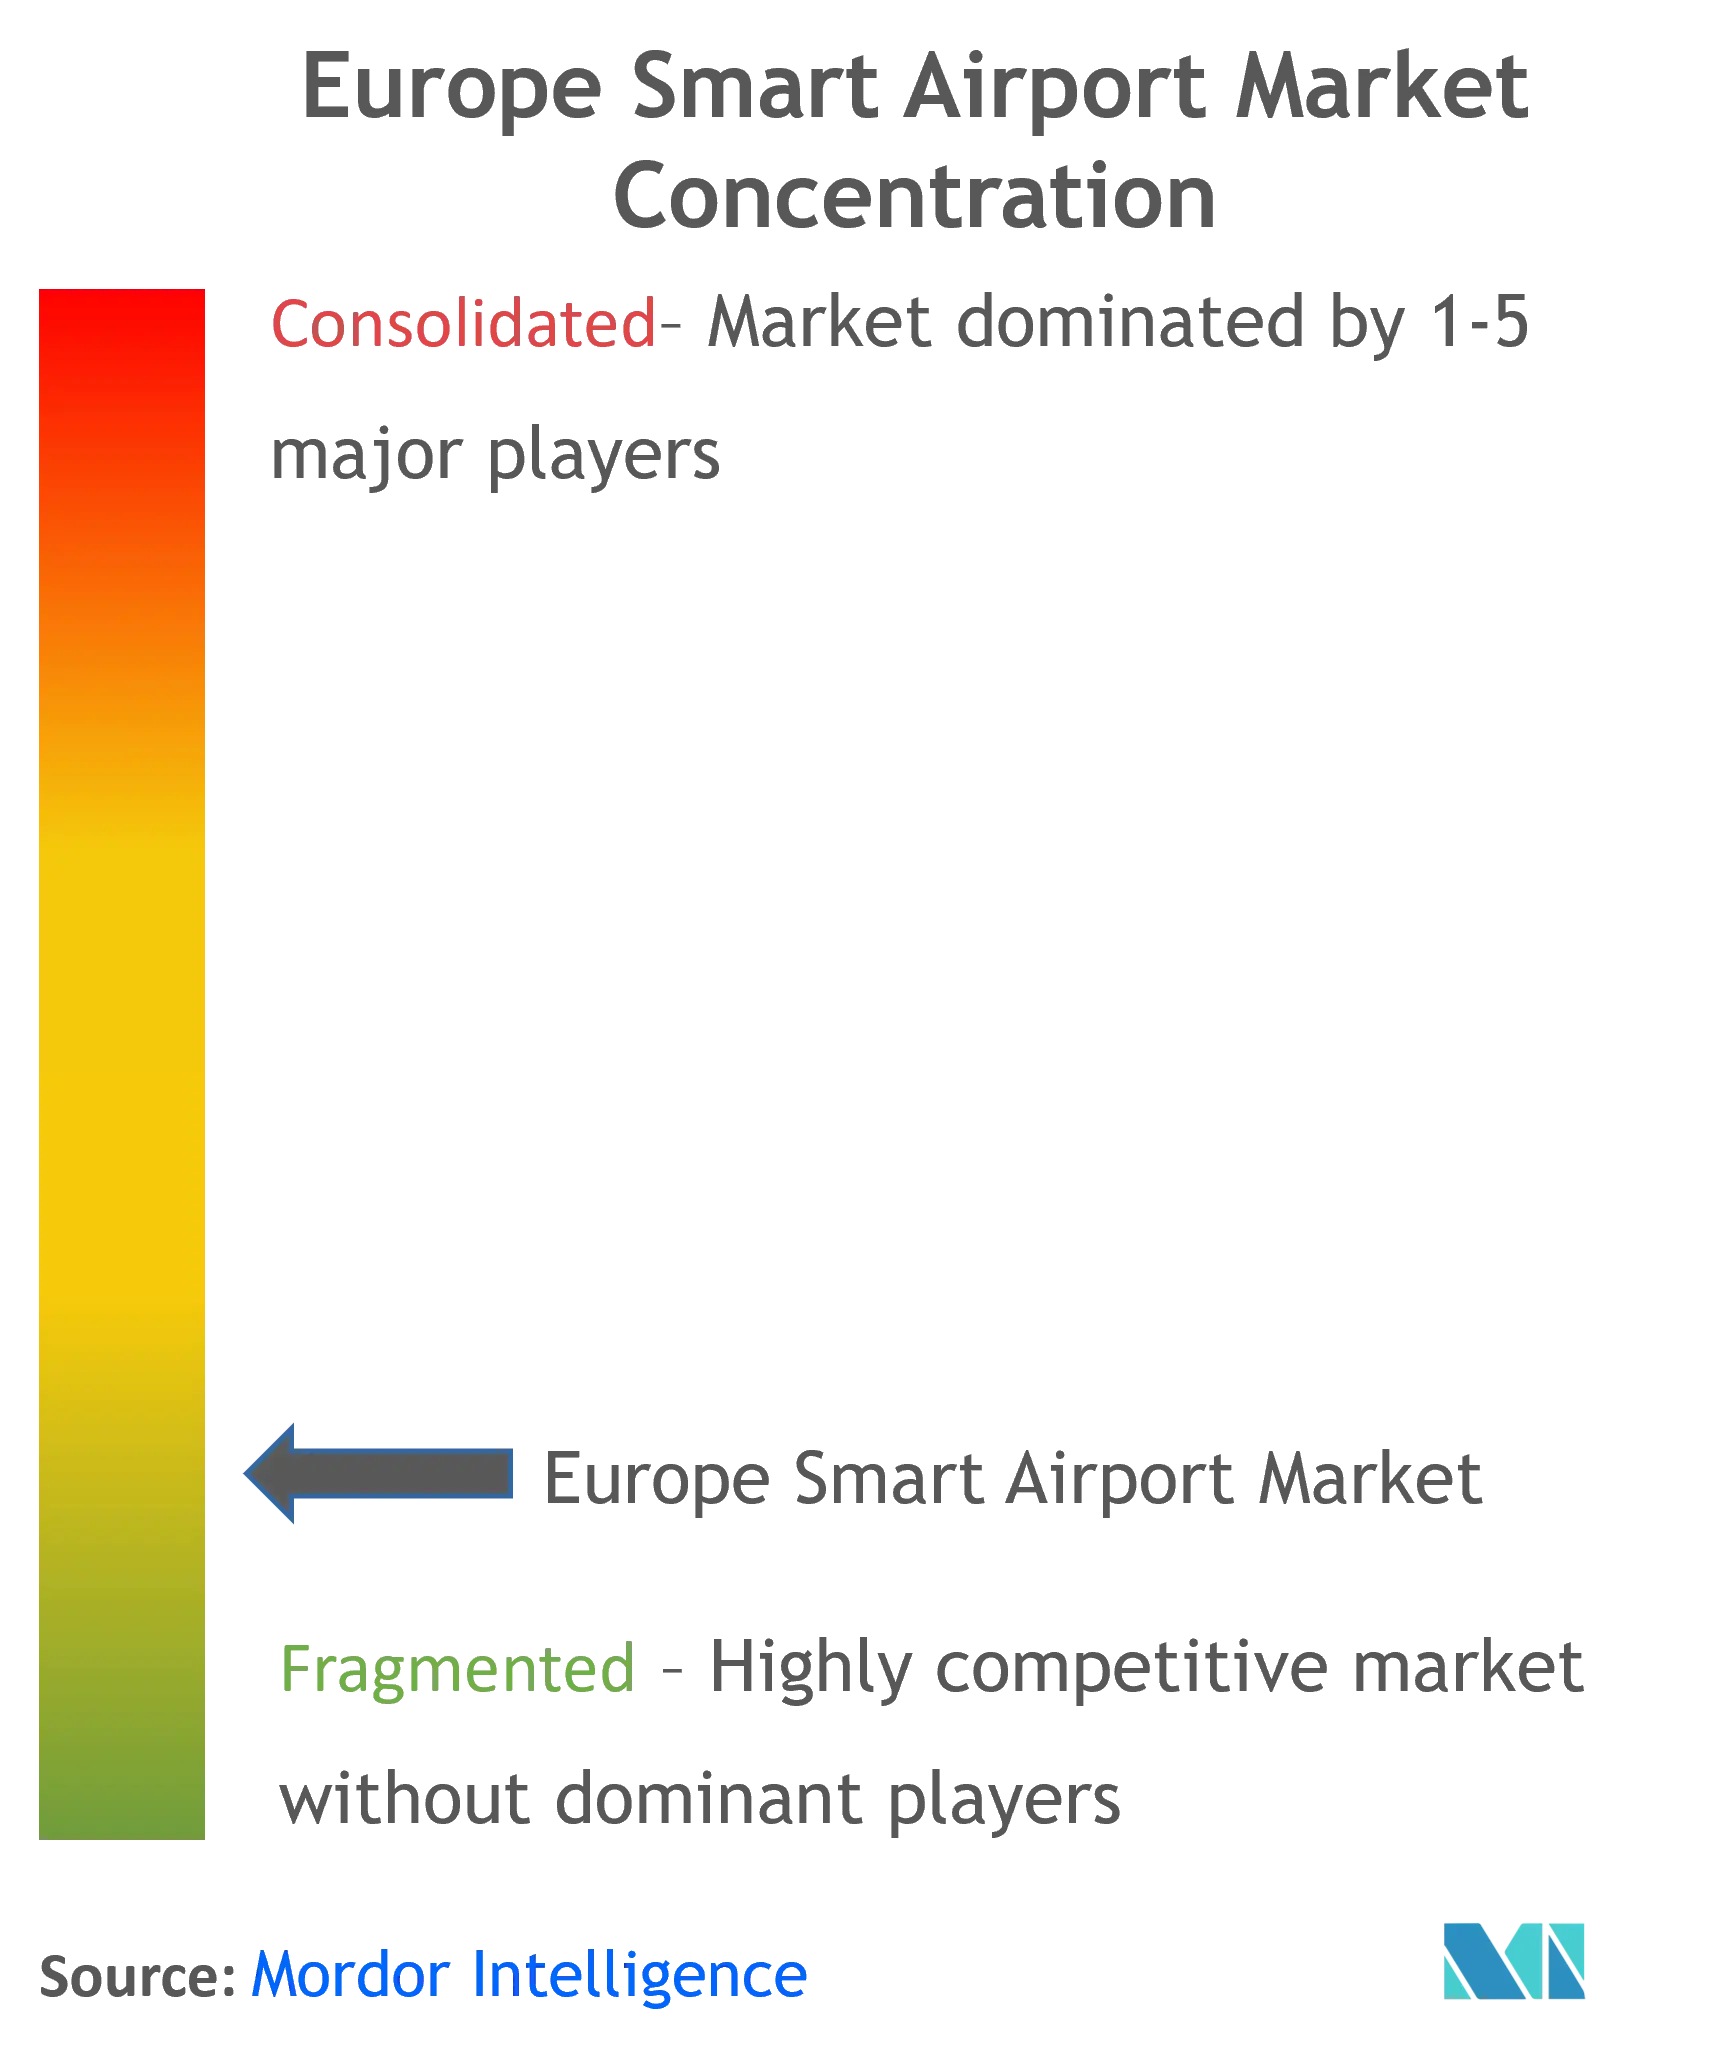 Europe Smart Airport Market Concentration